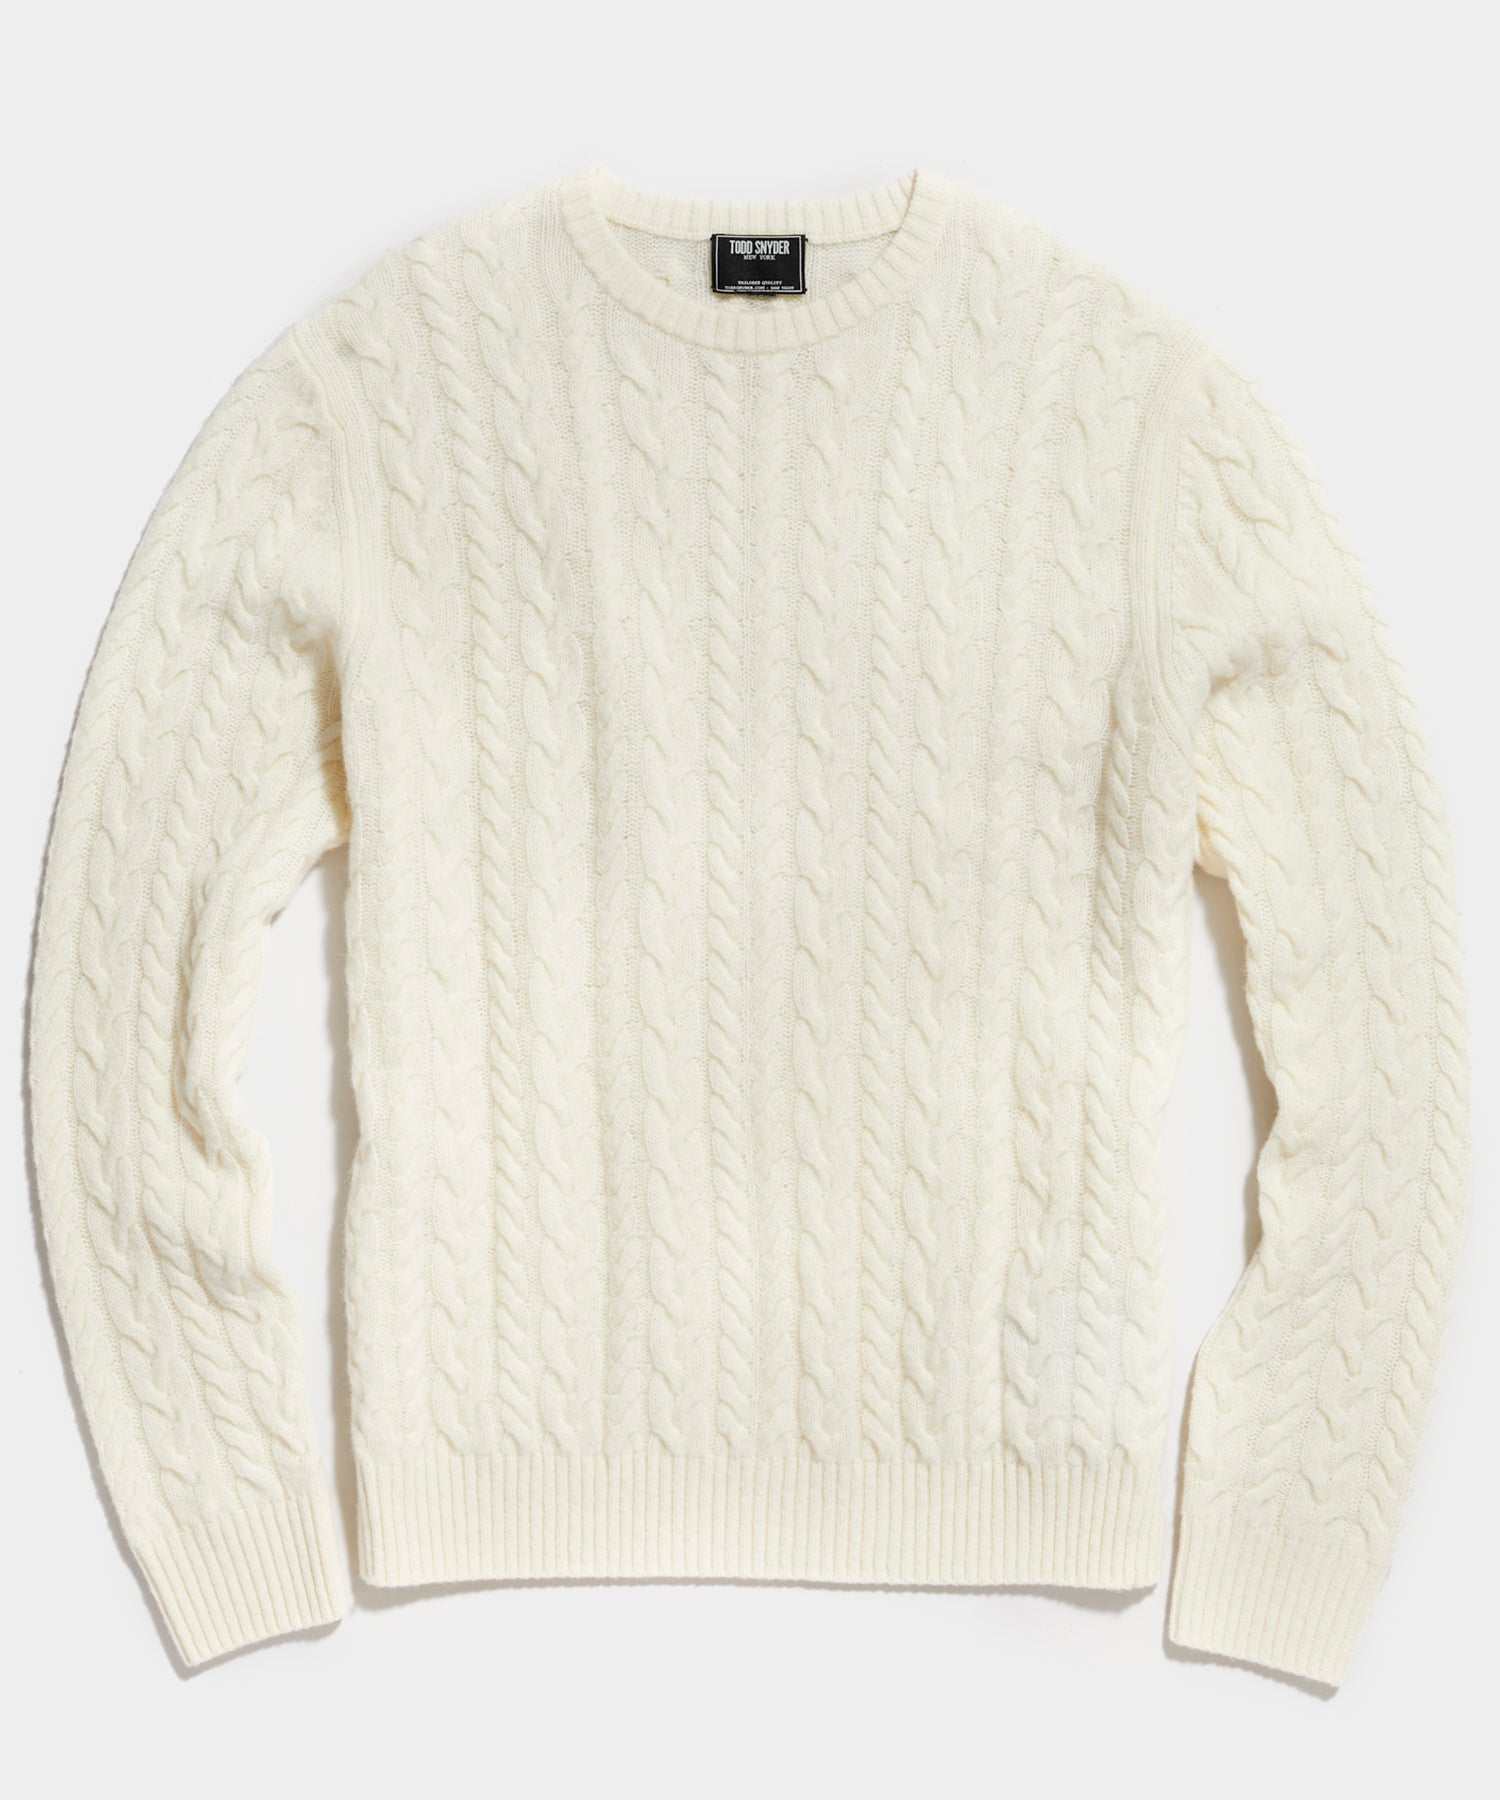 Winter White: Try a Little Texture